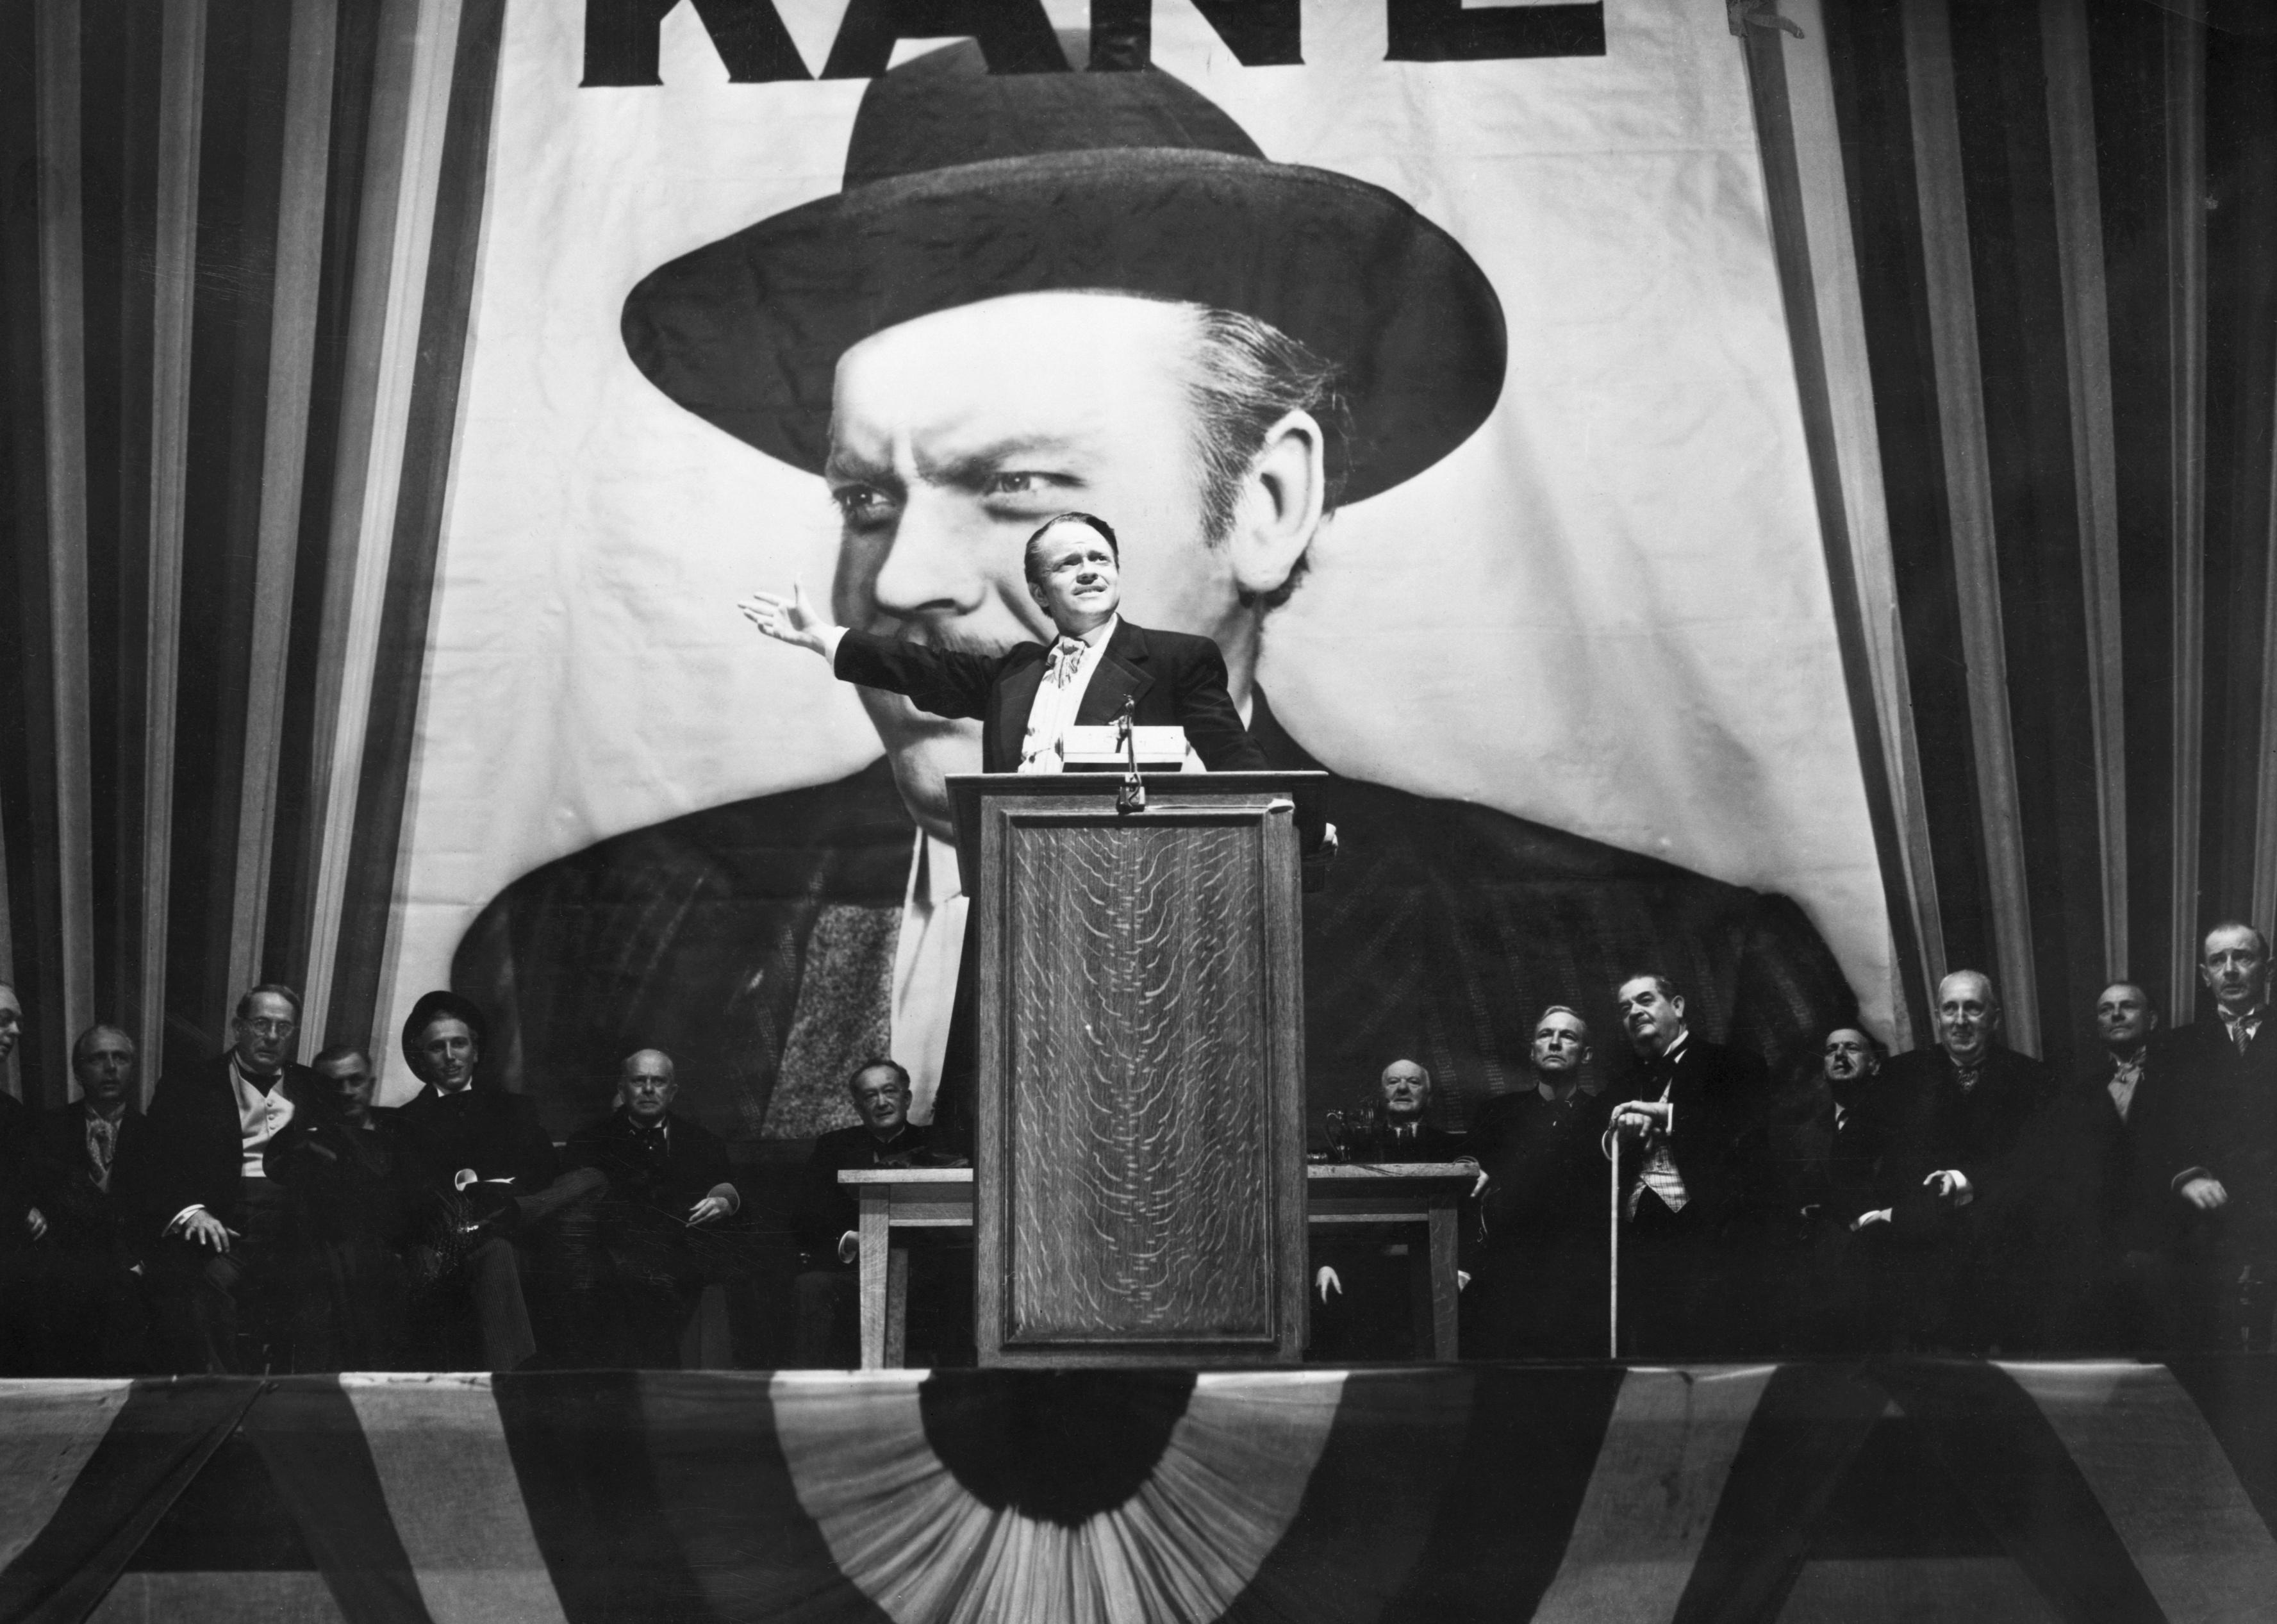 Orson Welles makes a speech before a portrait of himself in a scene from Citizen Kane.